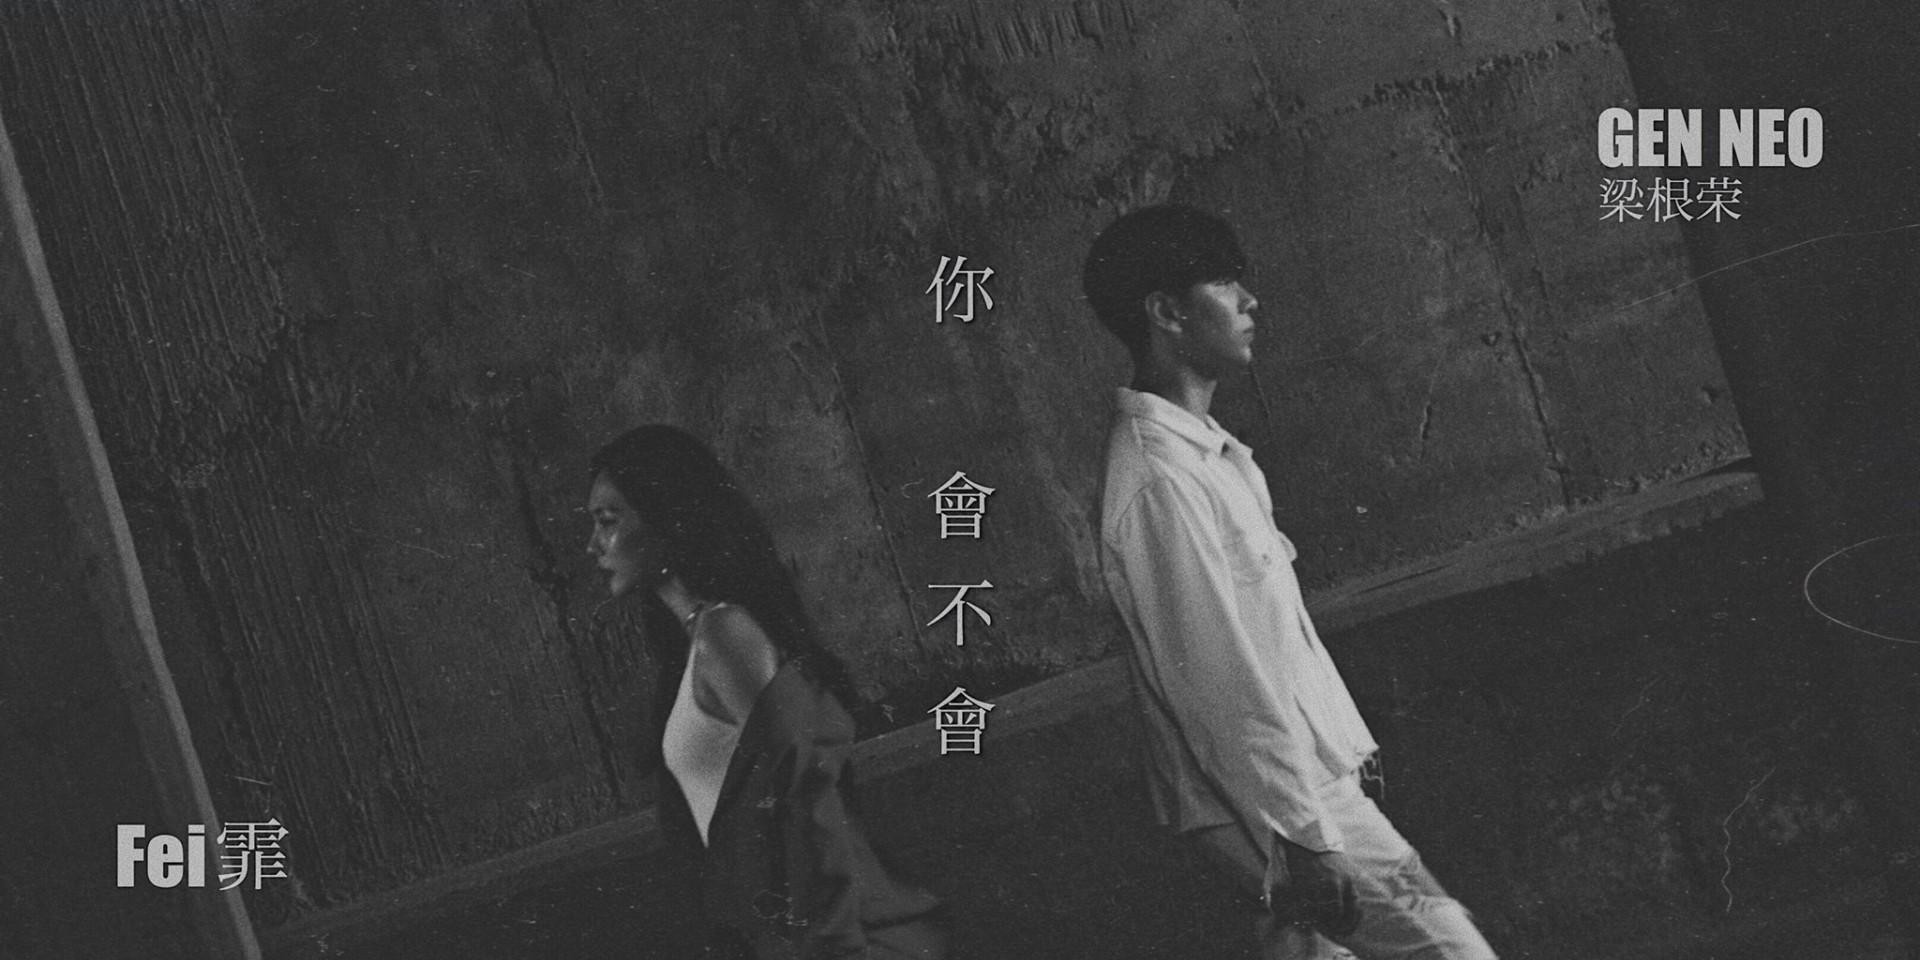 Local singer-songwriter Gen Neo releases duet with Miss A’s Fei - listen